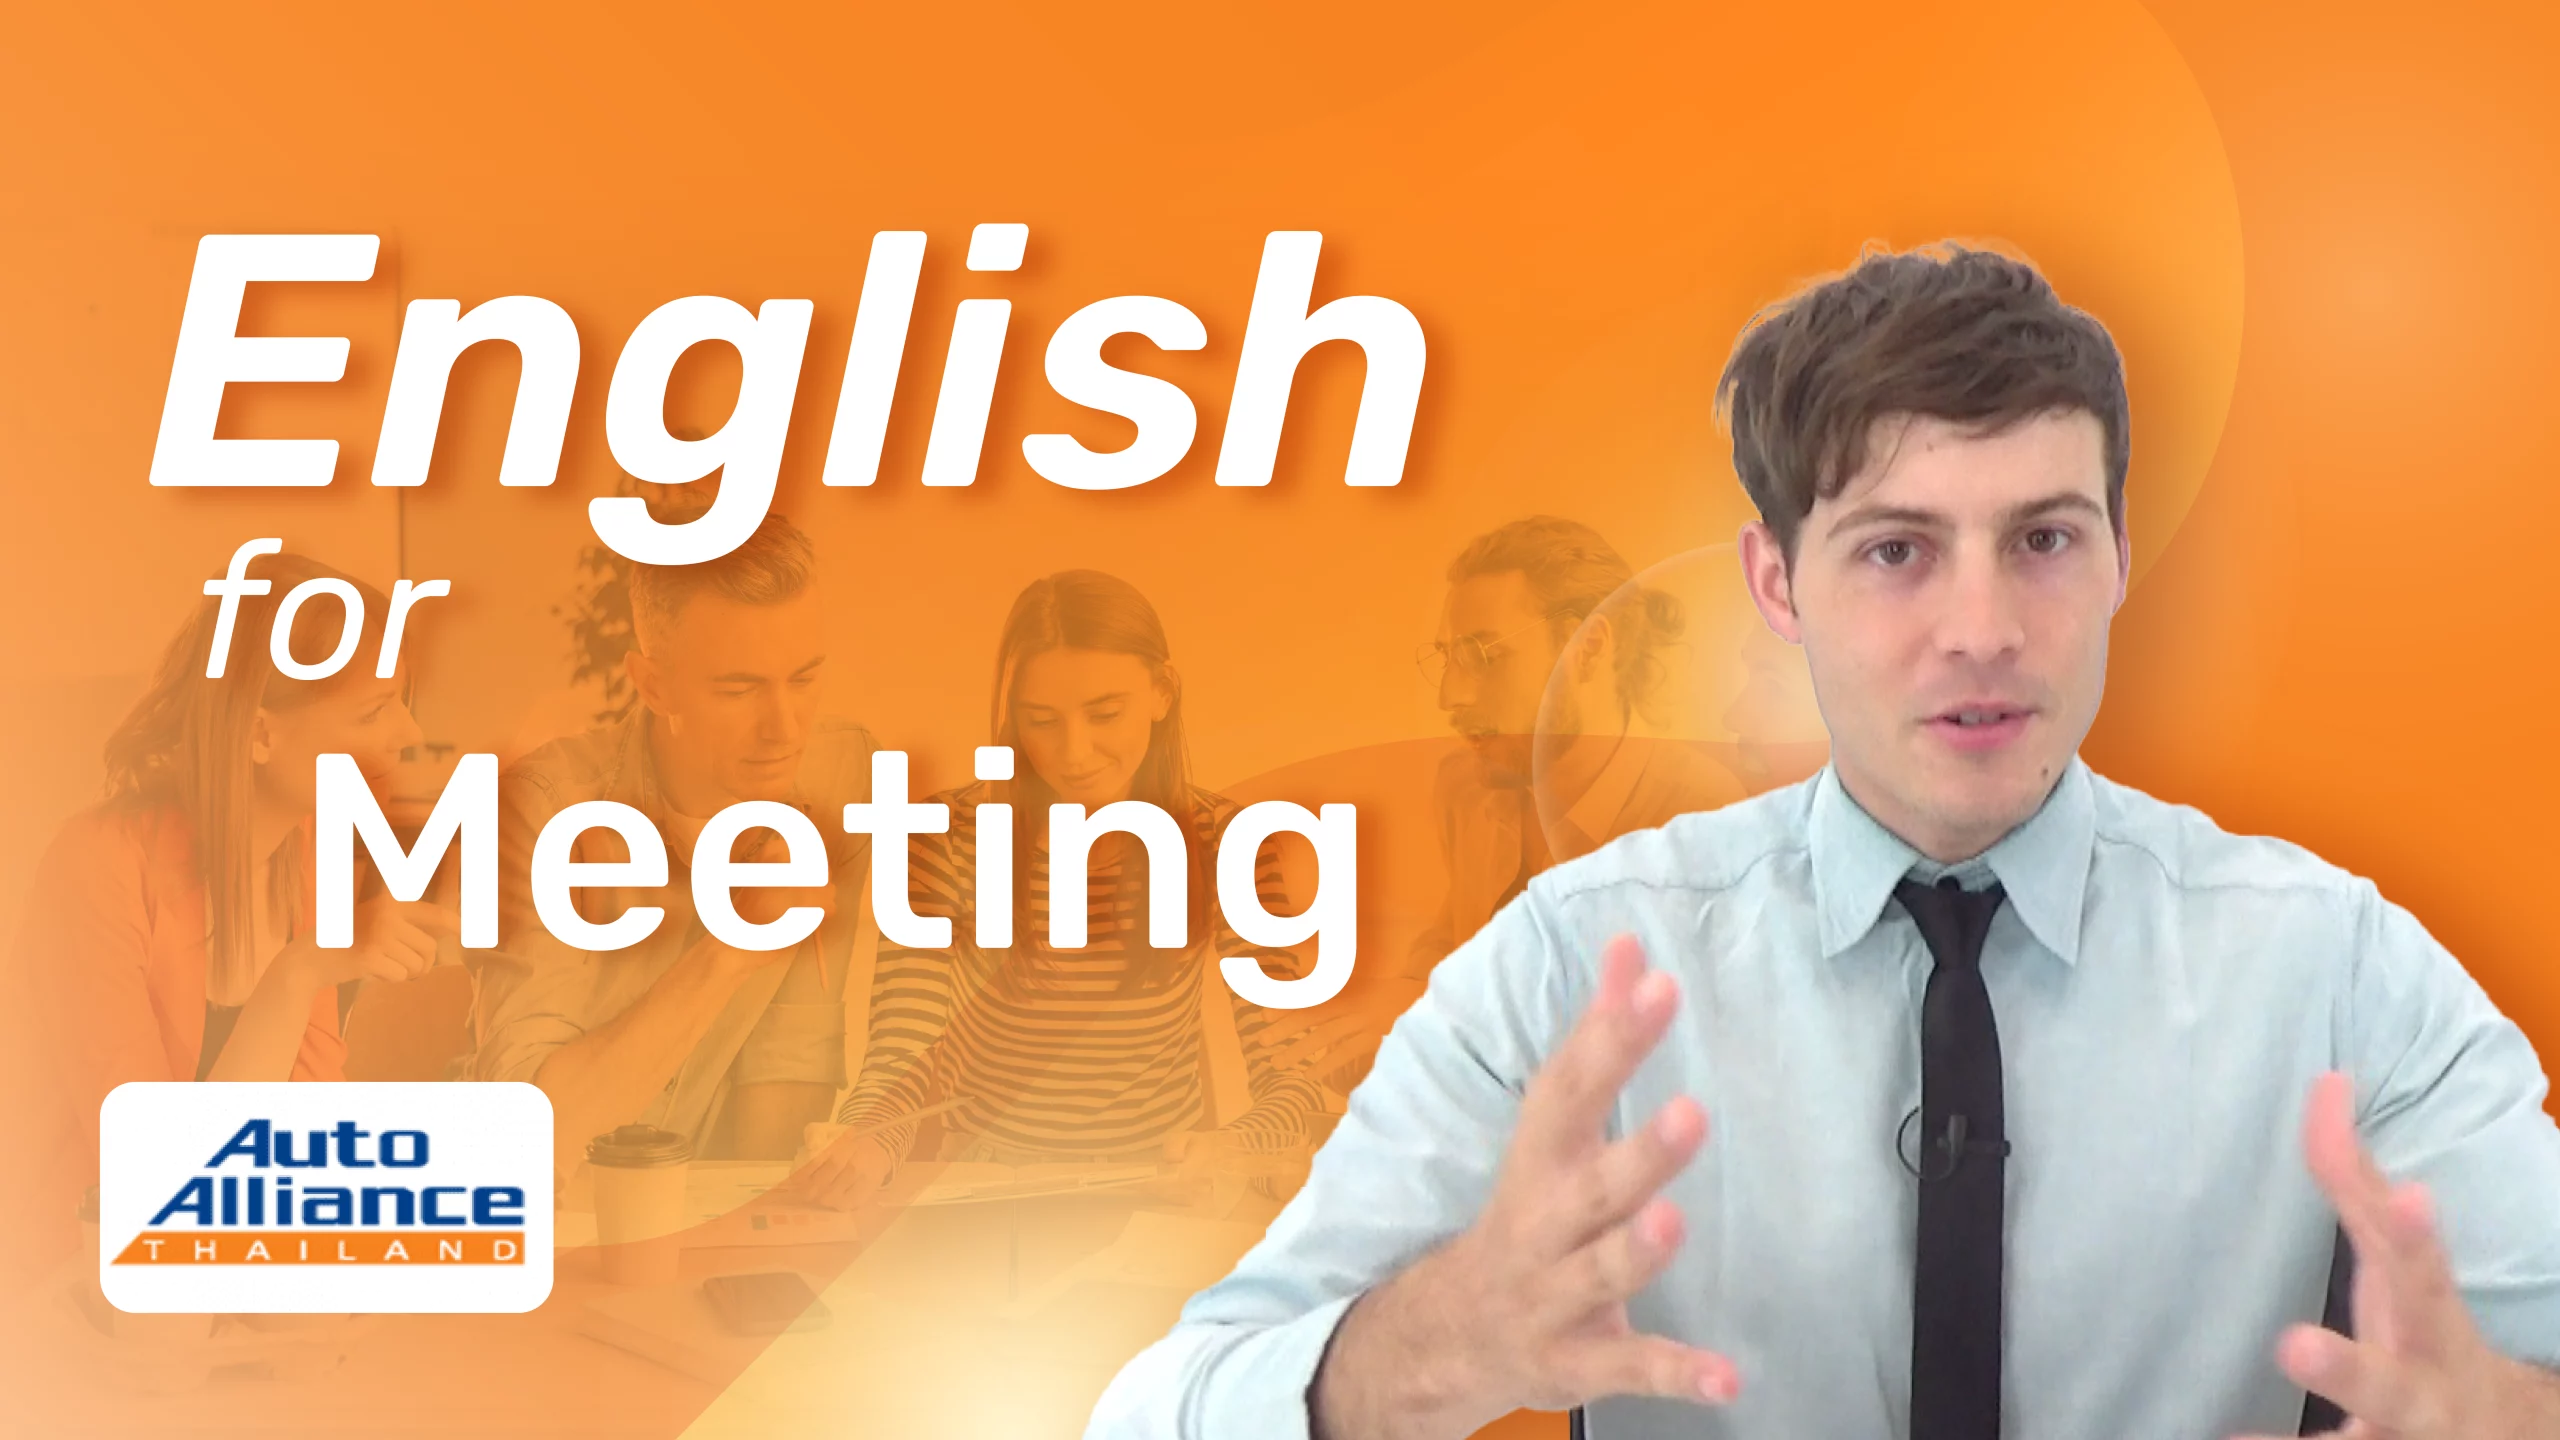 AAT: English for Meeting